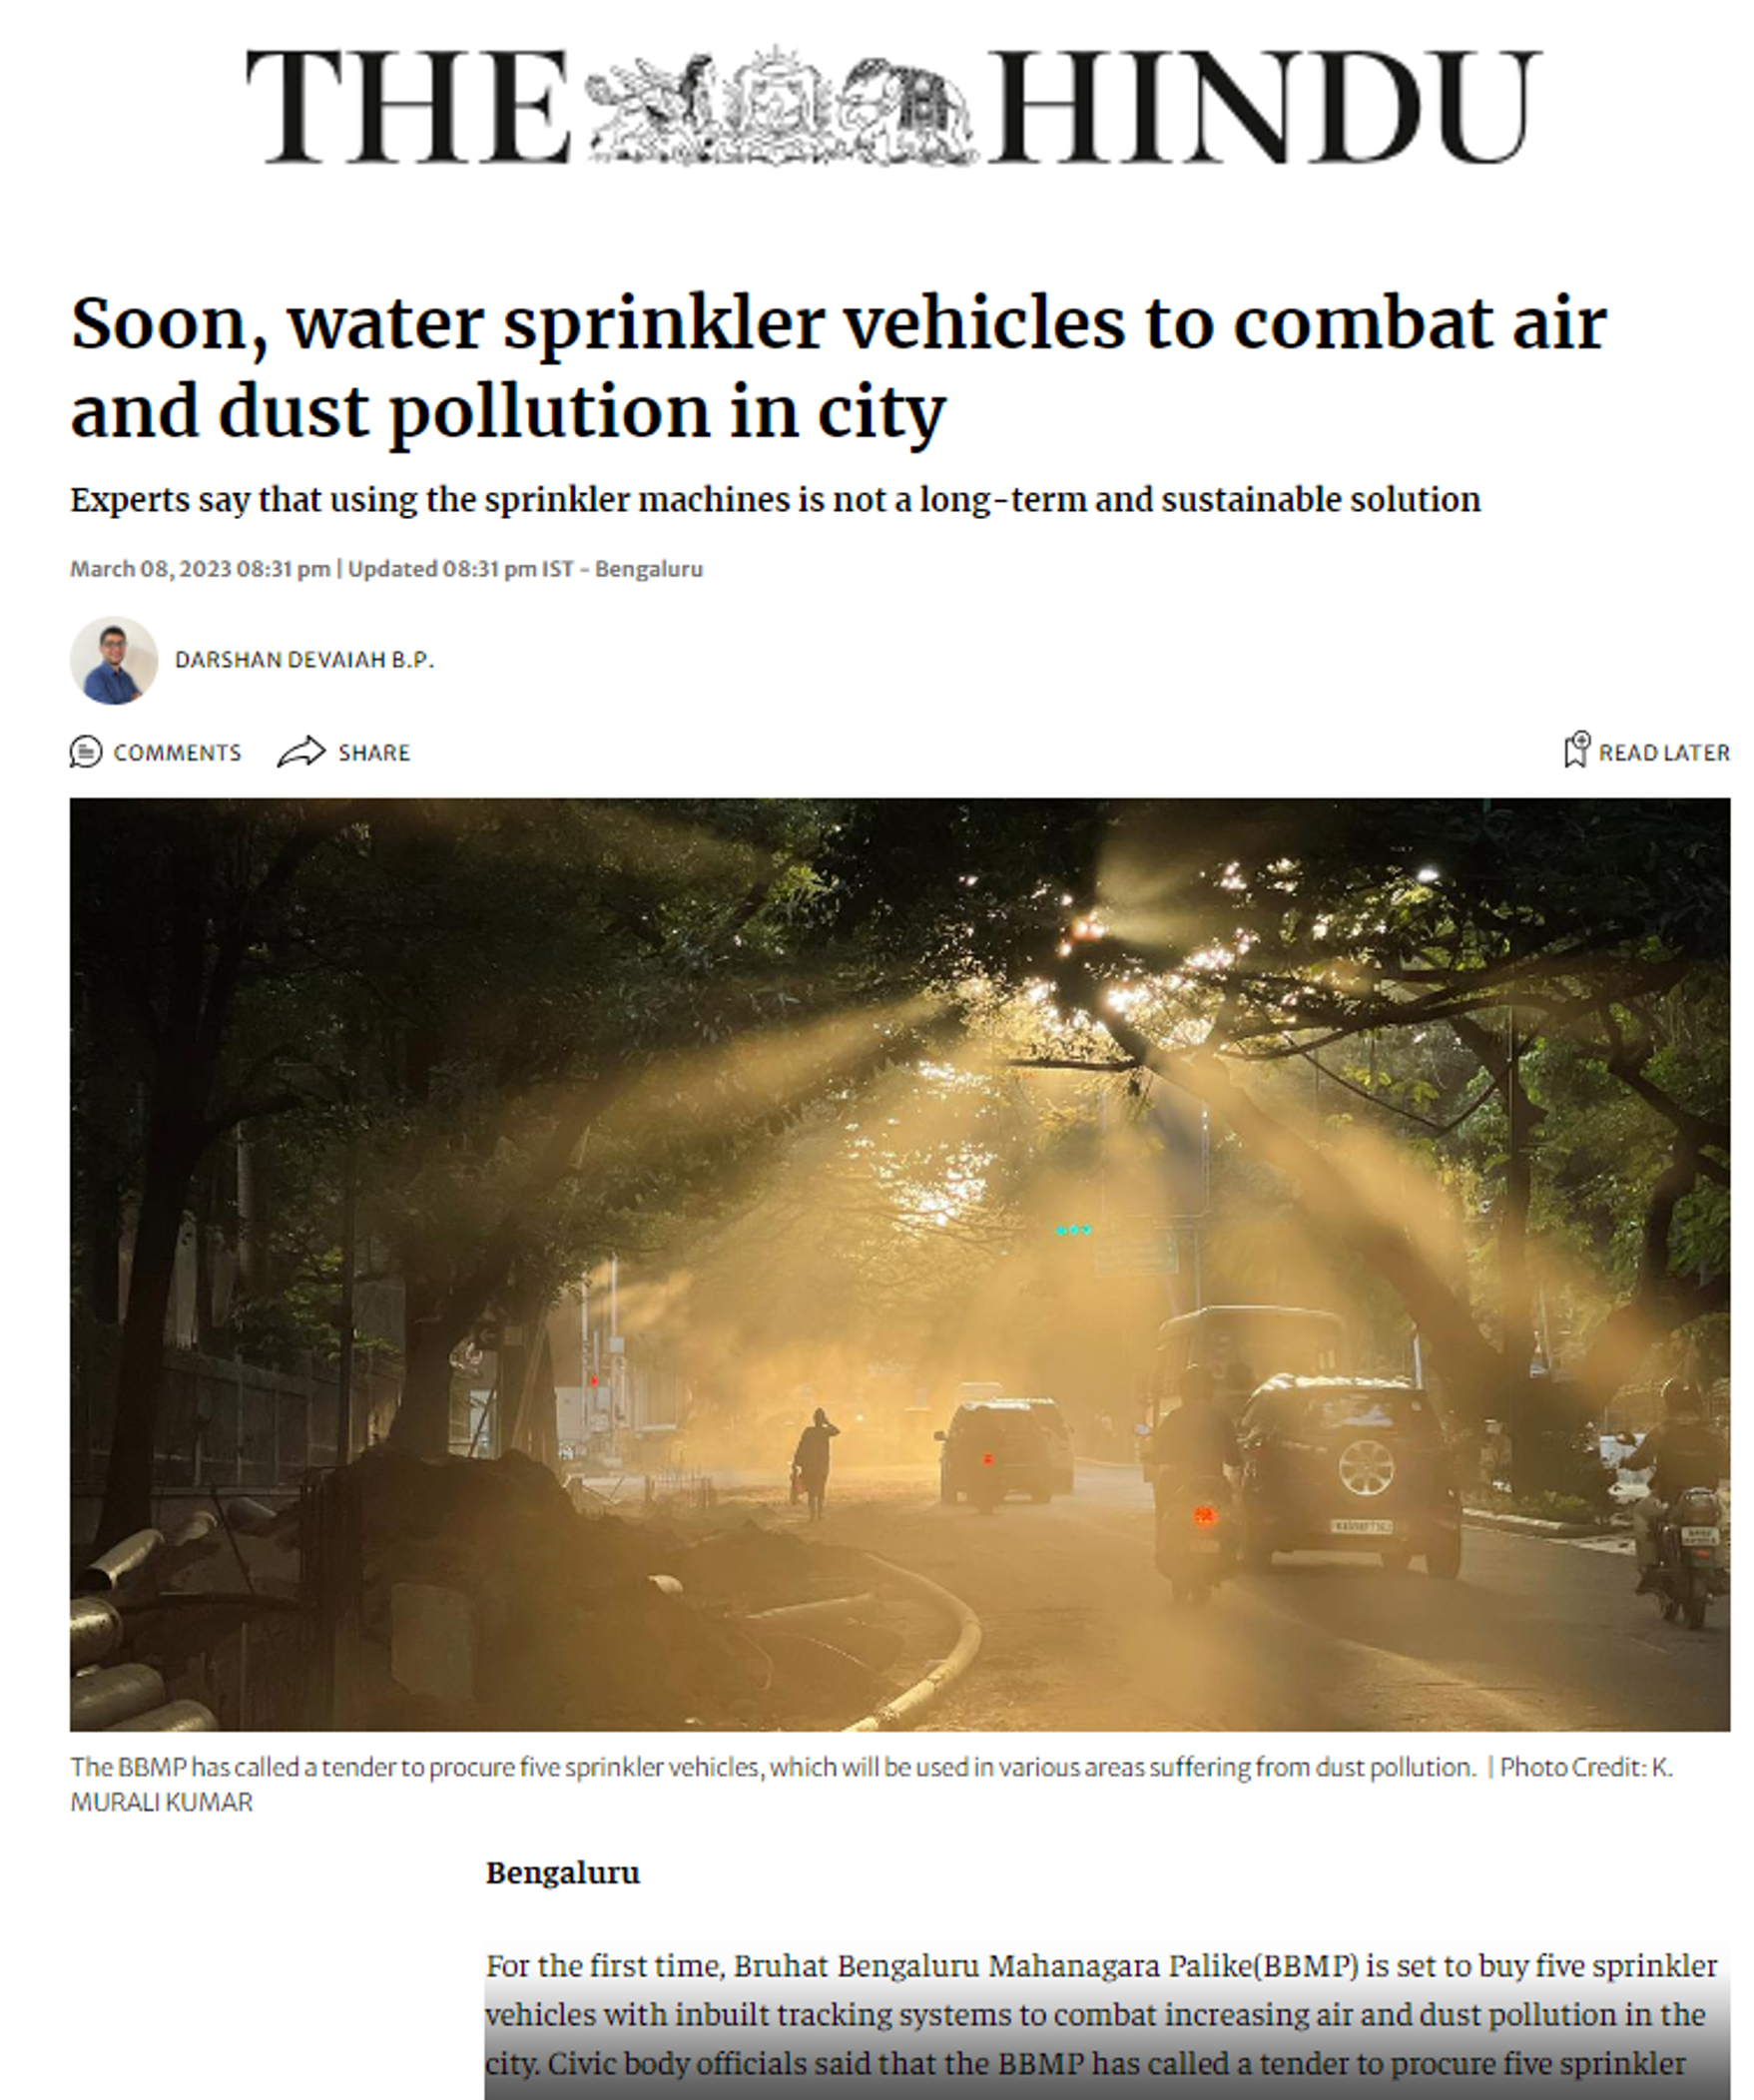 Dr Pratima Singh quoted by The Hindu on the role of water sprinkler machines in combating air and dust pollution